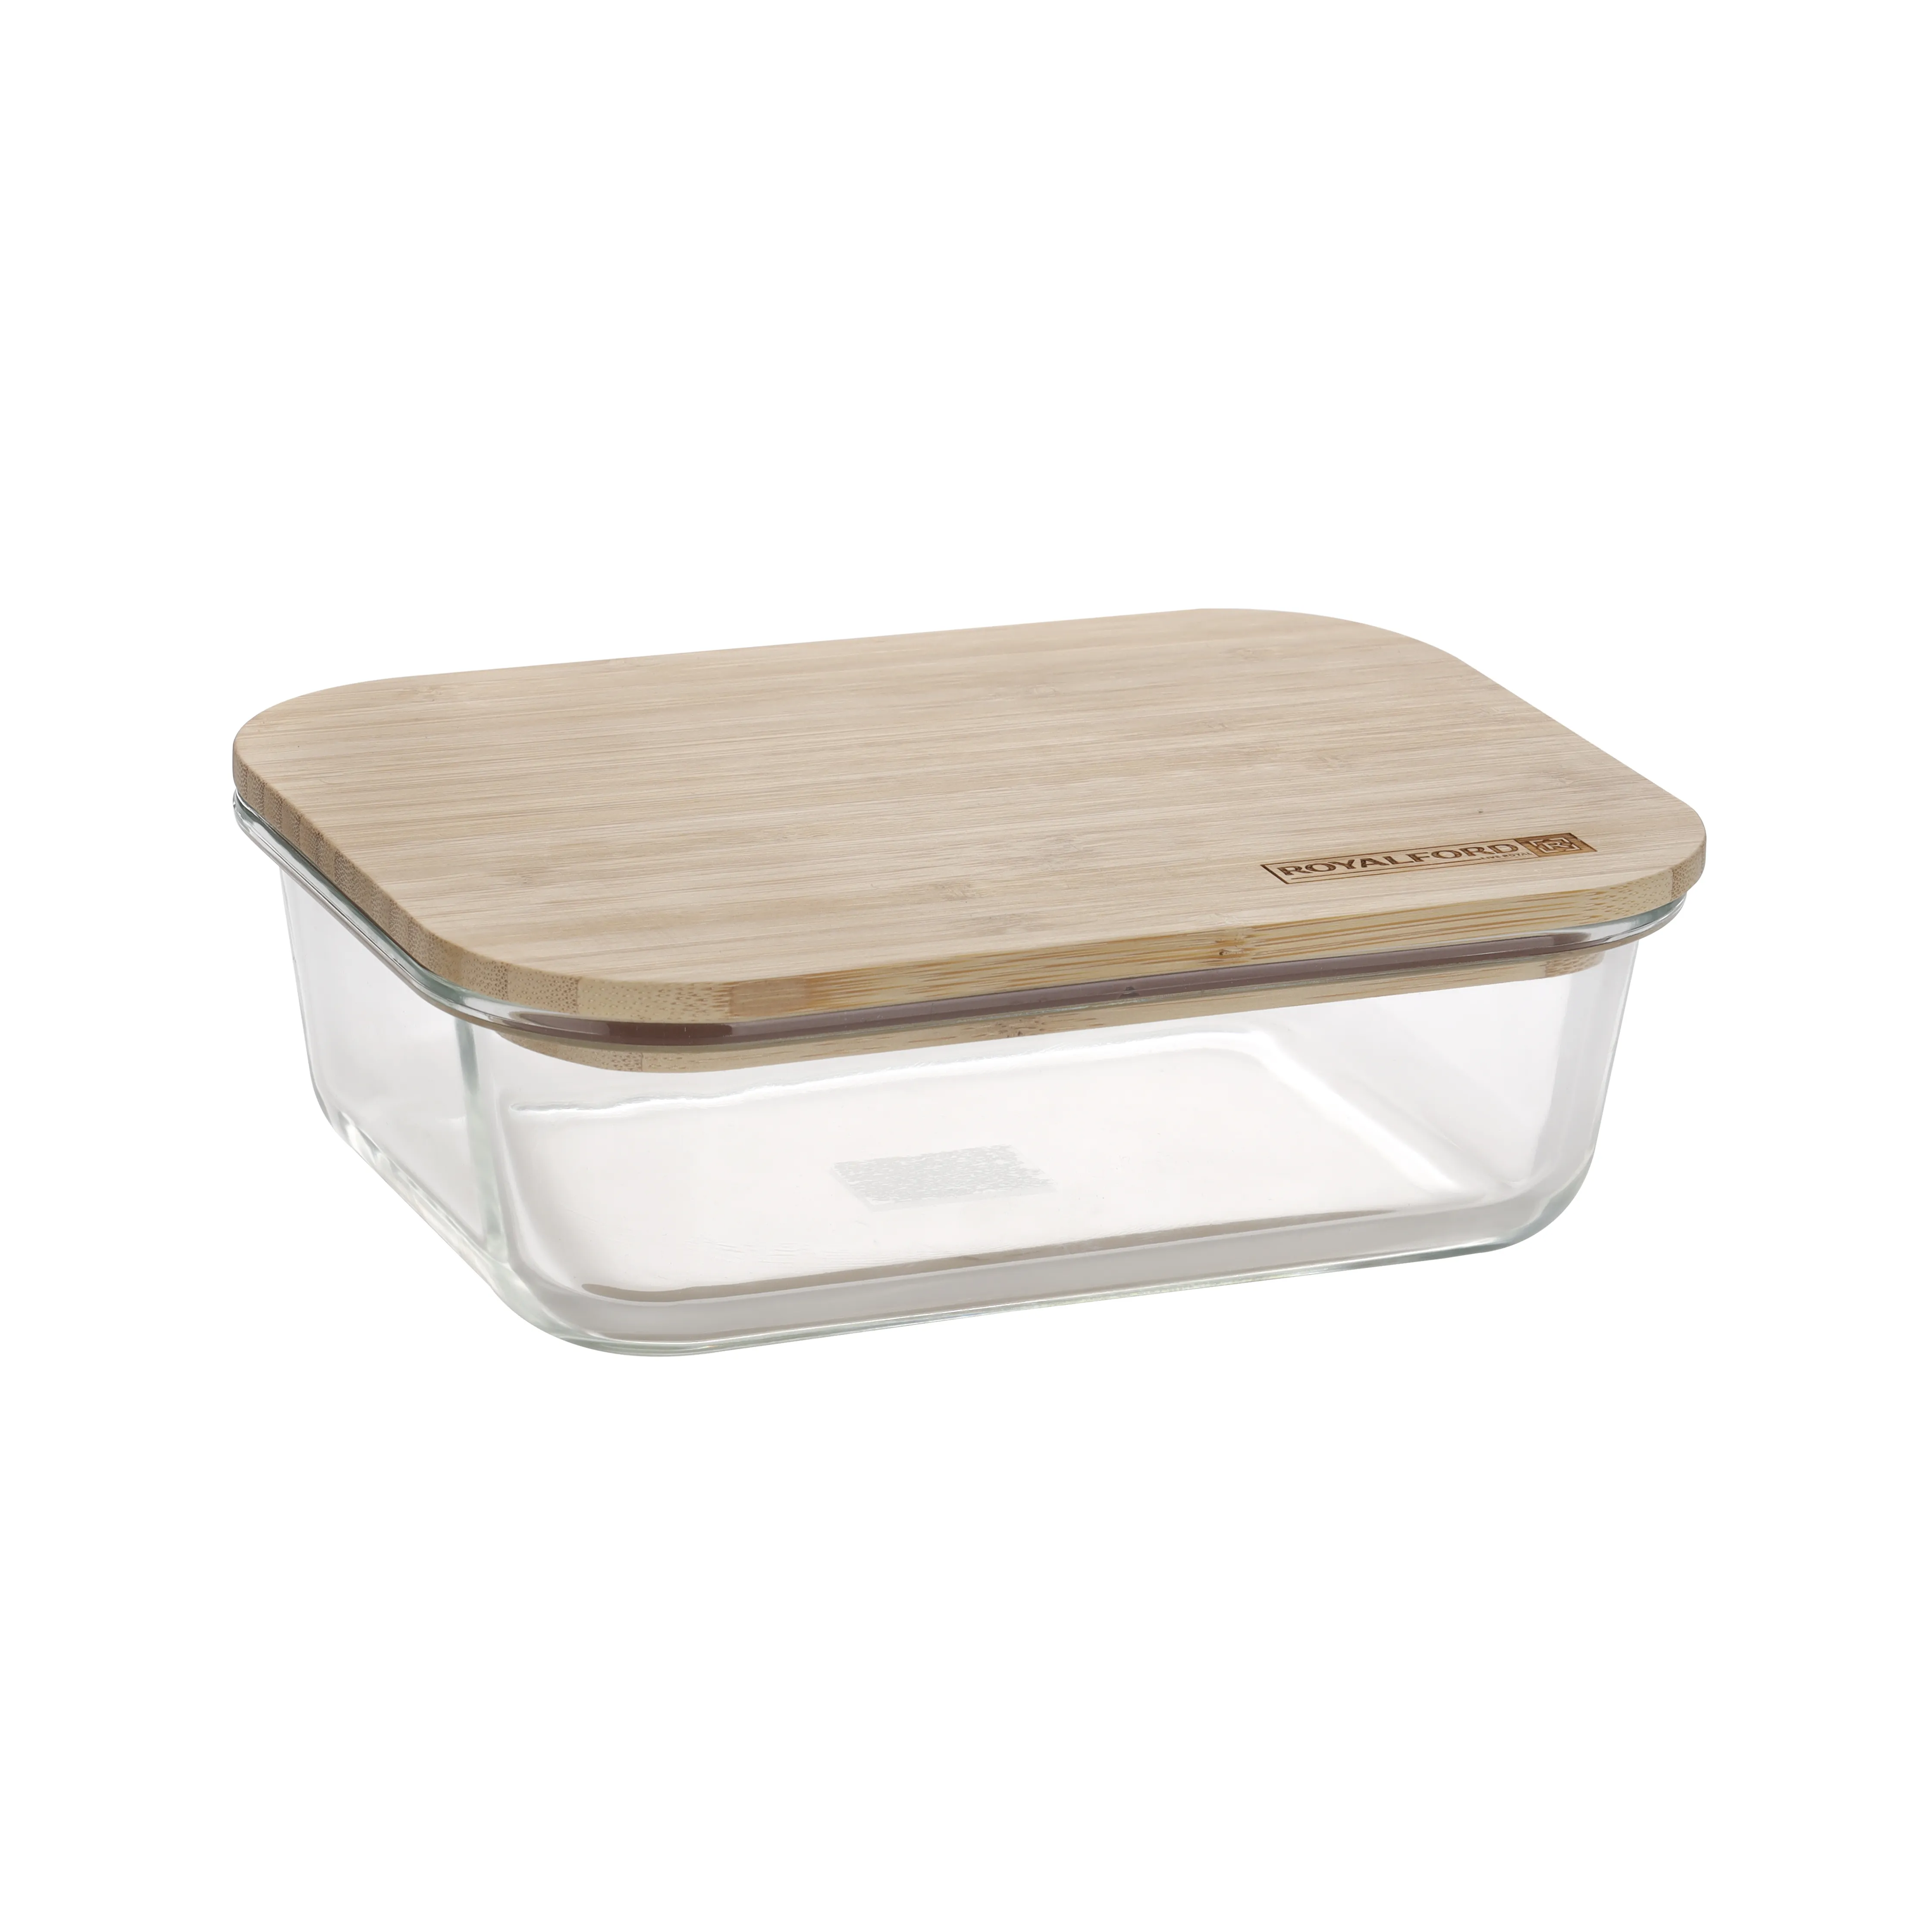 Royalford Rectangular Glass Food Container with Bamboo Lid, RF10320 - 1050ml, Freezer & Dishwasher Safe, Air Tight Lid with Silicone Sealing Ring, High Thermal Shock Resistant